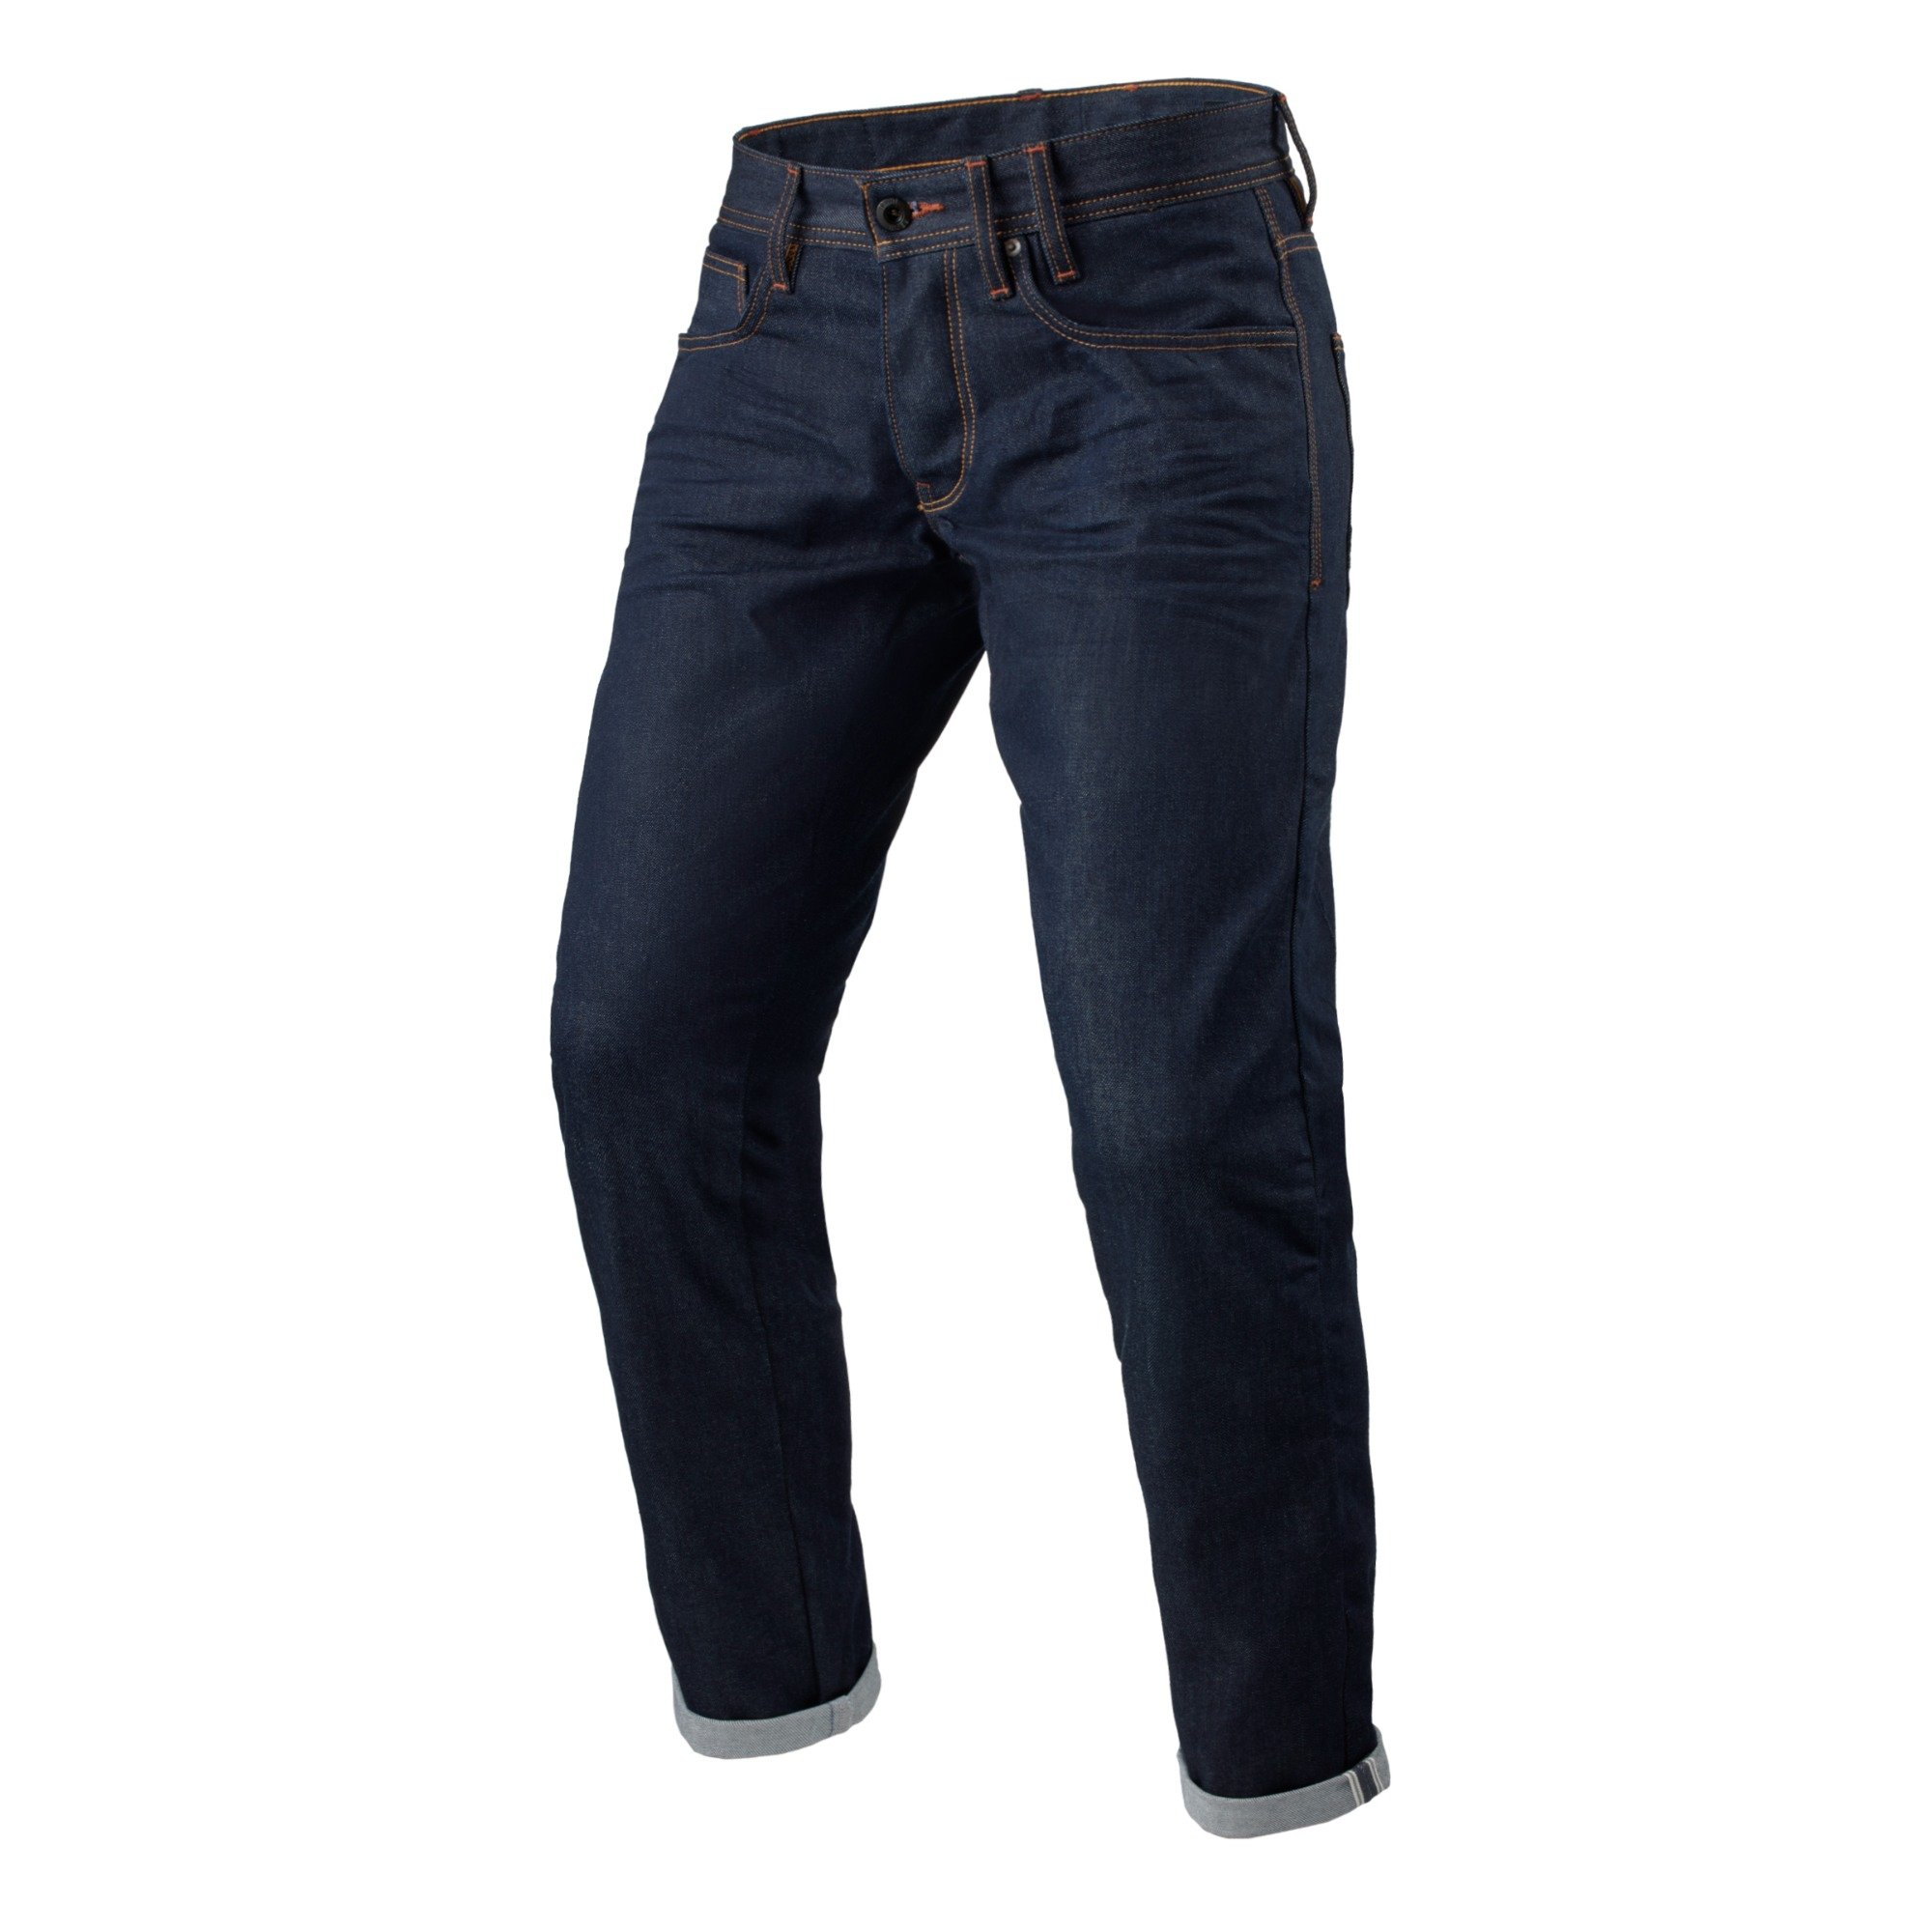 Image of REV'IT! Jeans Lewis Selvedge TF Dark Blue L32 Motorcycle Pants Size L32/W30 ID 8700001358033